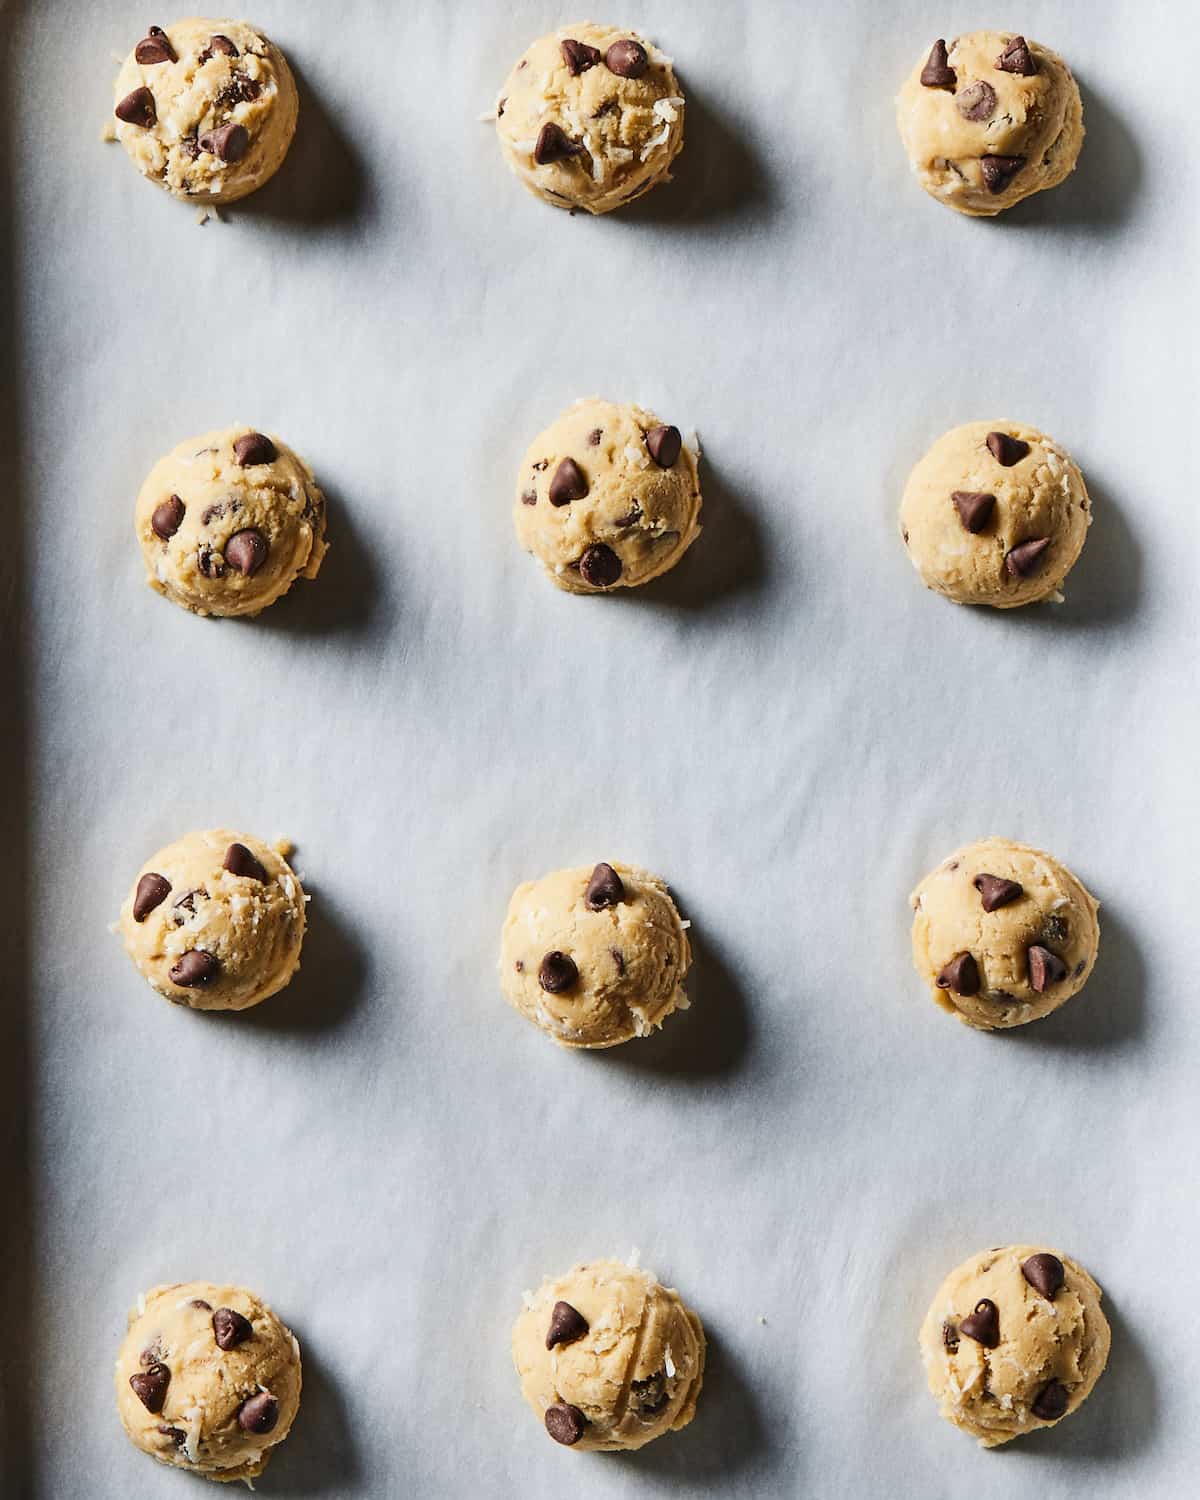 A parchment lined surface with a 4x3 grid of Coconut Chocolate Chip Cookie dough balls.